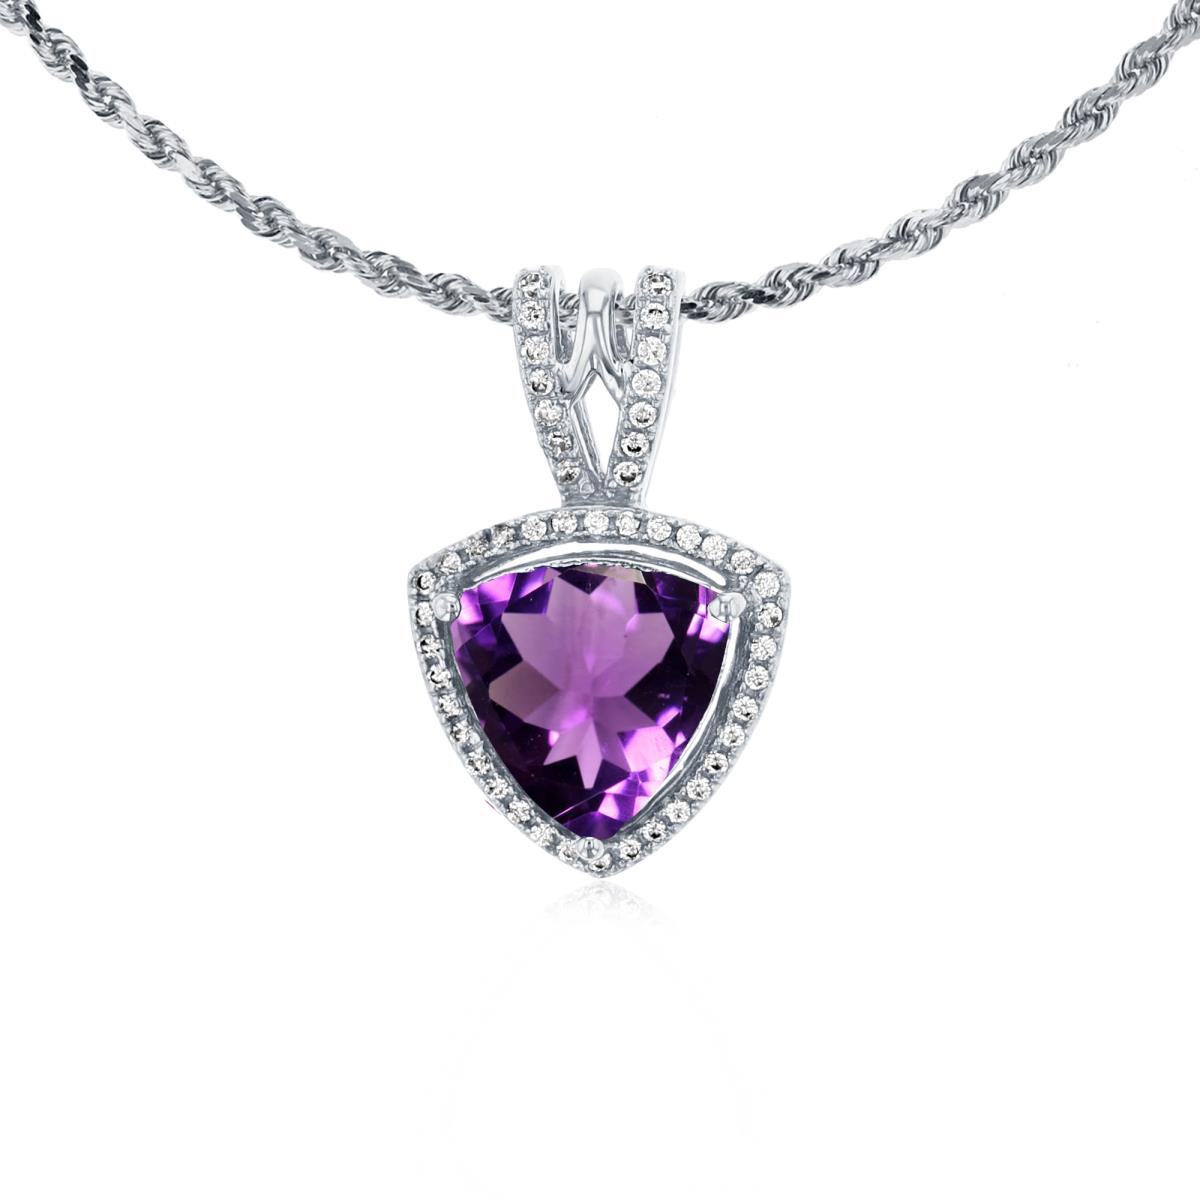 14K White Gold 8mm Trillion Amethyst & 0.13 CTTW Diamonds Frame 18" Rope Chain Necklace